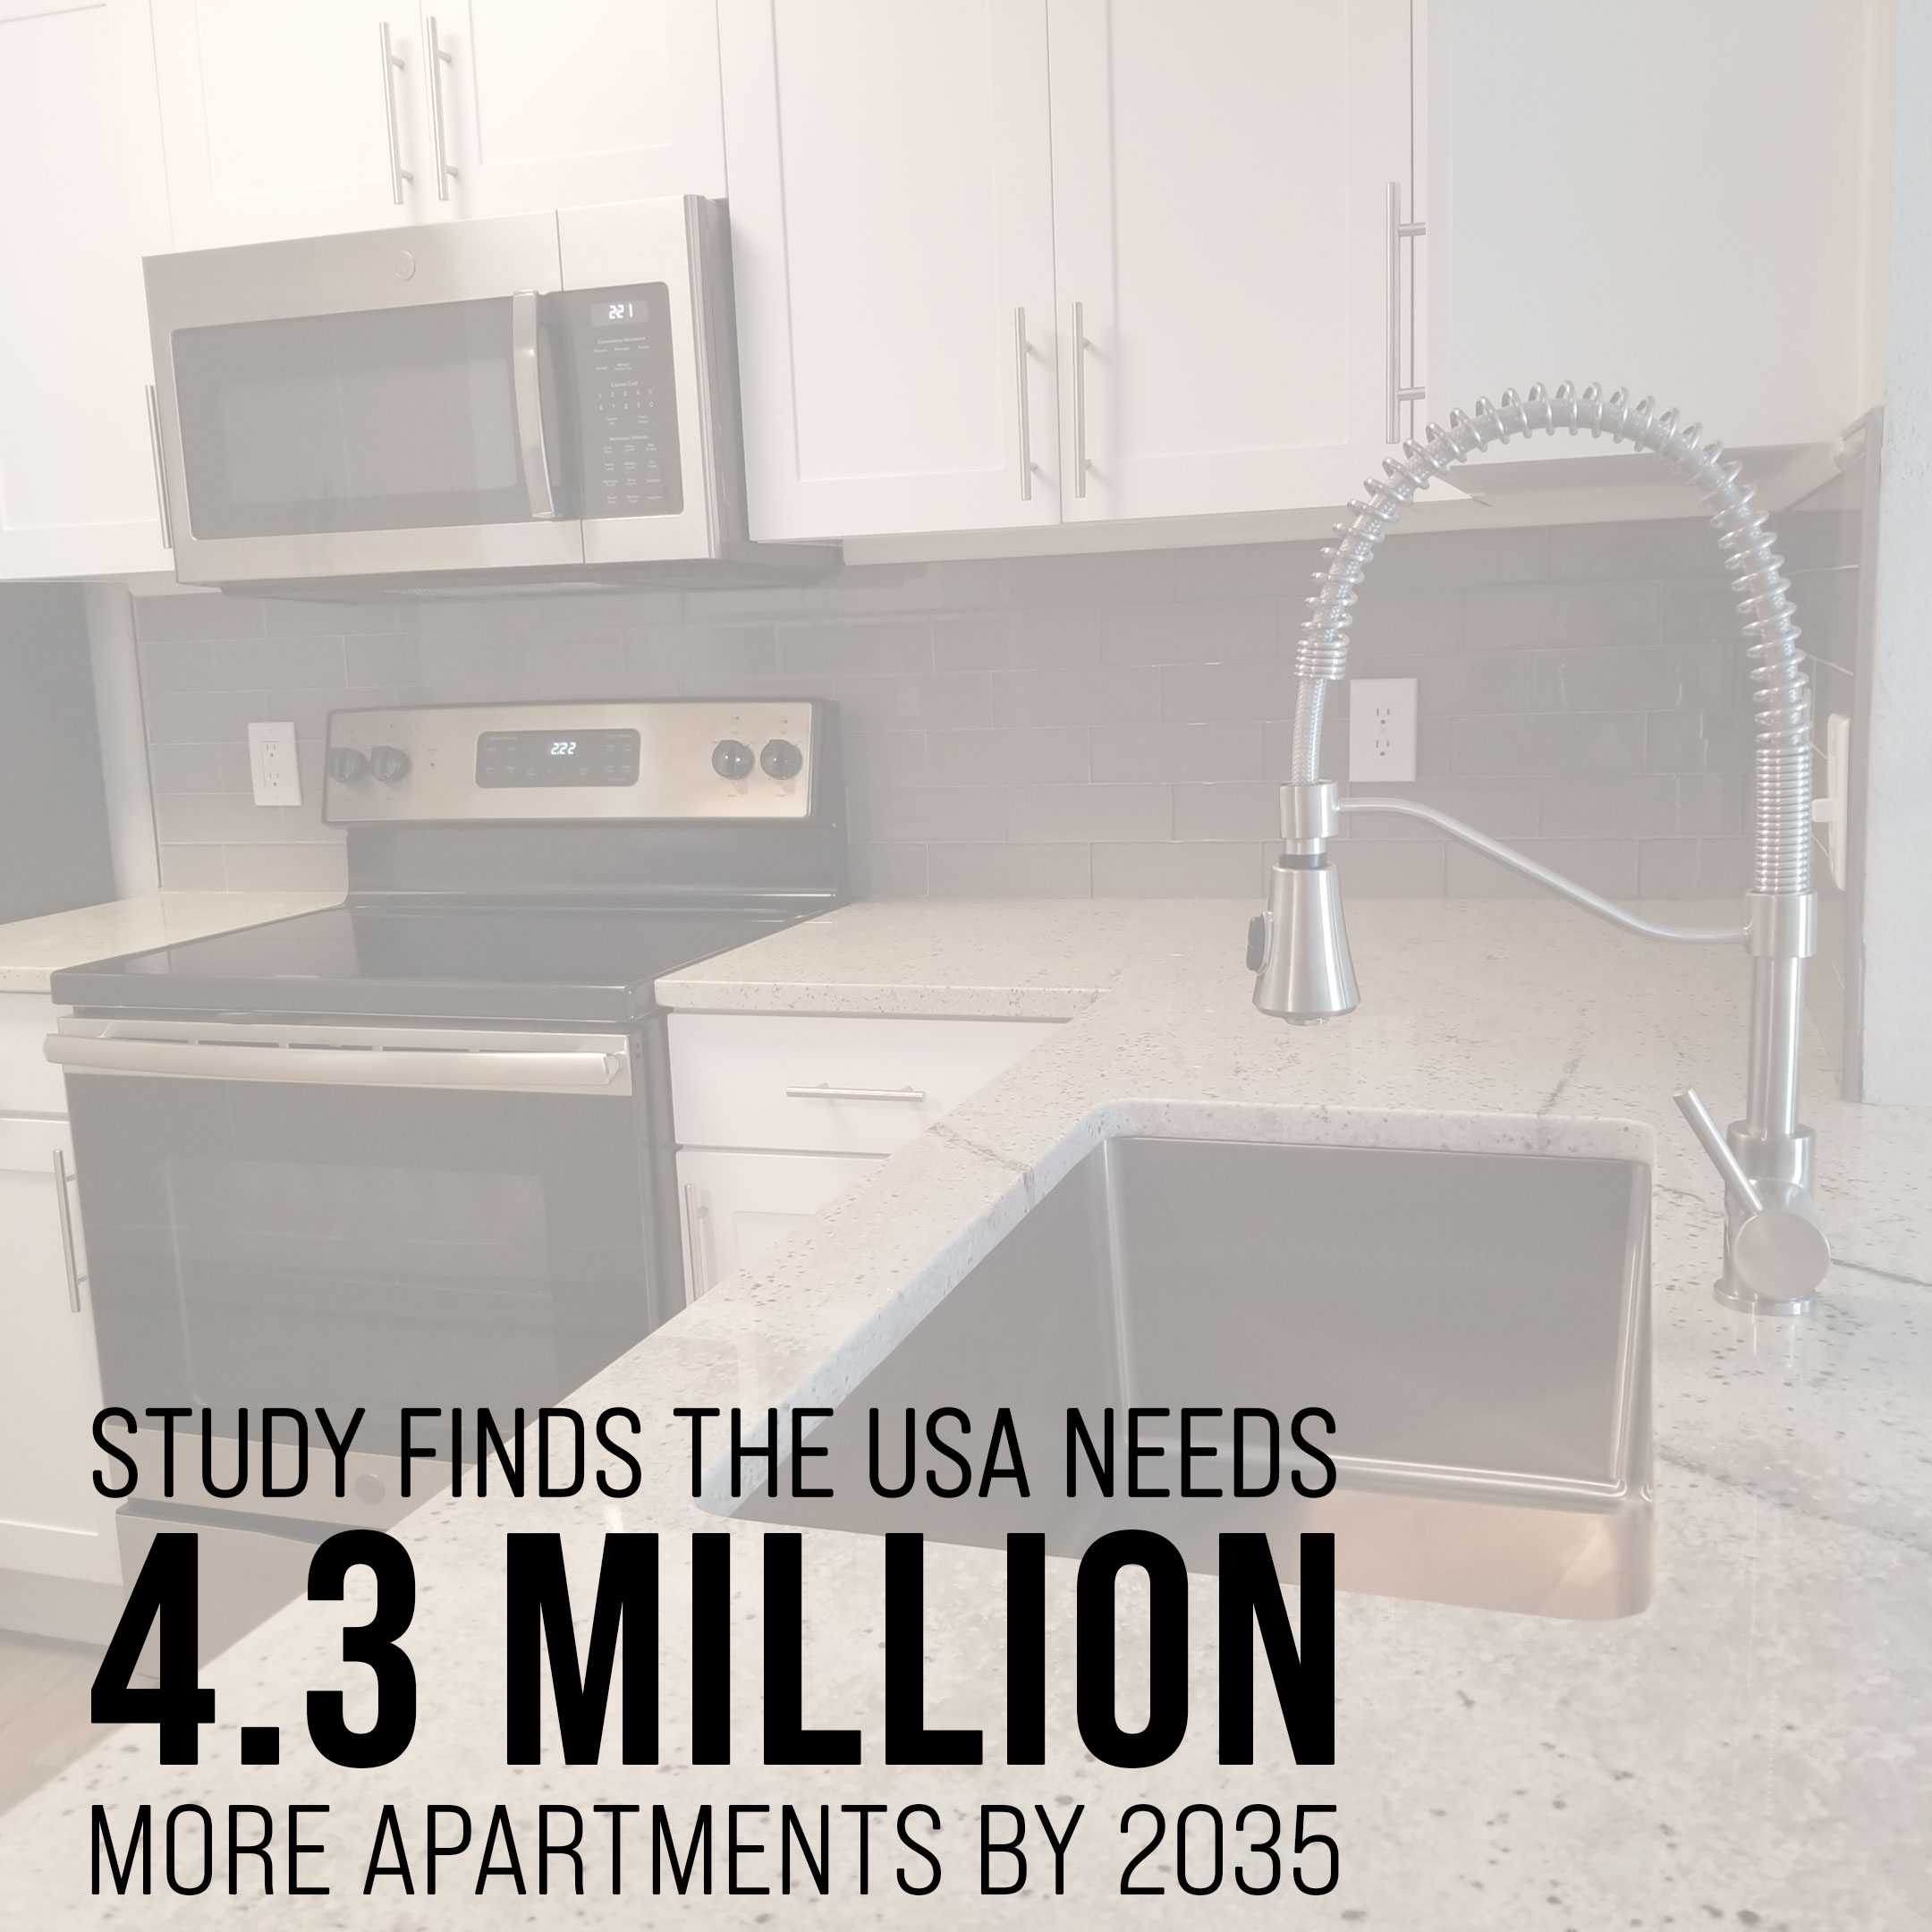 Study Finds The USA Needs 4.3 Million More Apartments by 2035